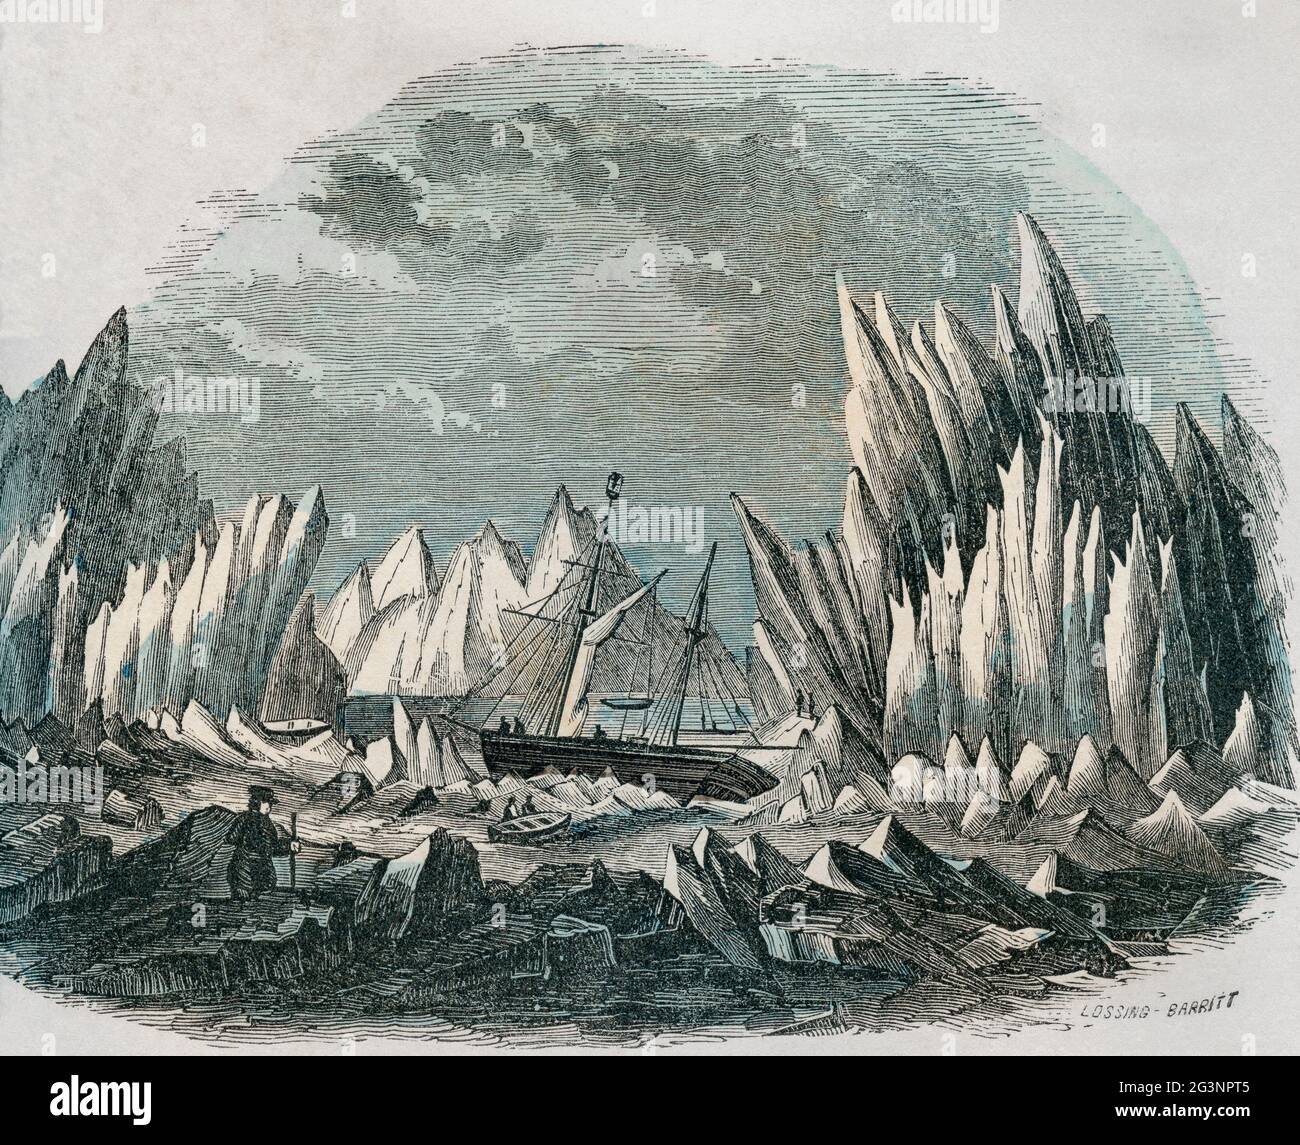 The British ship Prince Albert trapped in ice whilst attempting to search for Sir John Franklin's ill-fated 1845 Arctic expedition.  From An Illuminated History of North America, from the earliest period to the present time, published 1860. Stock Photo